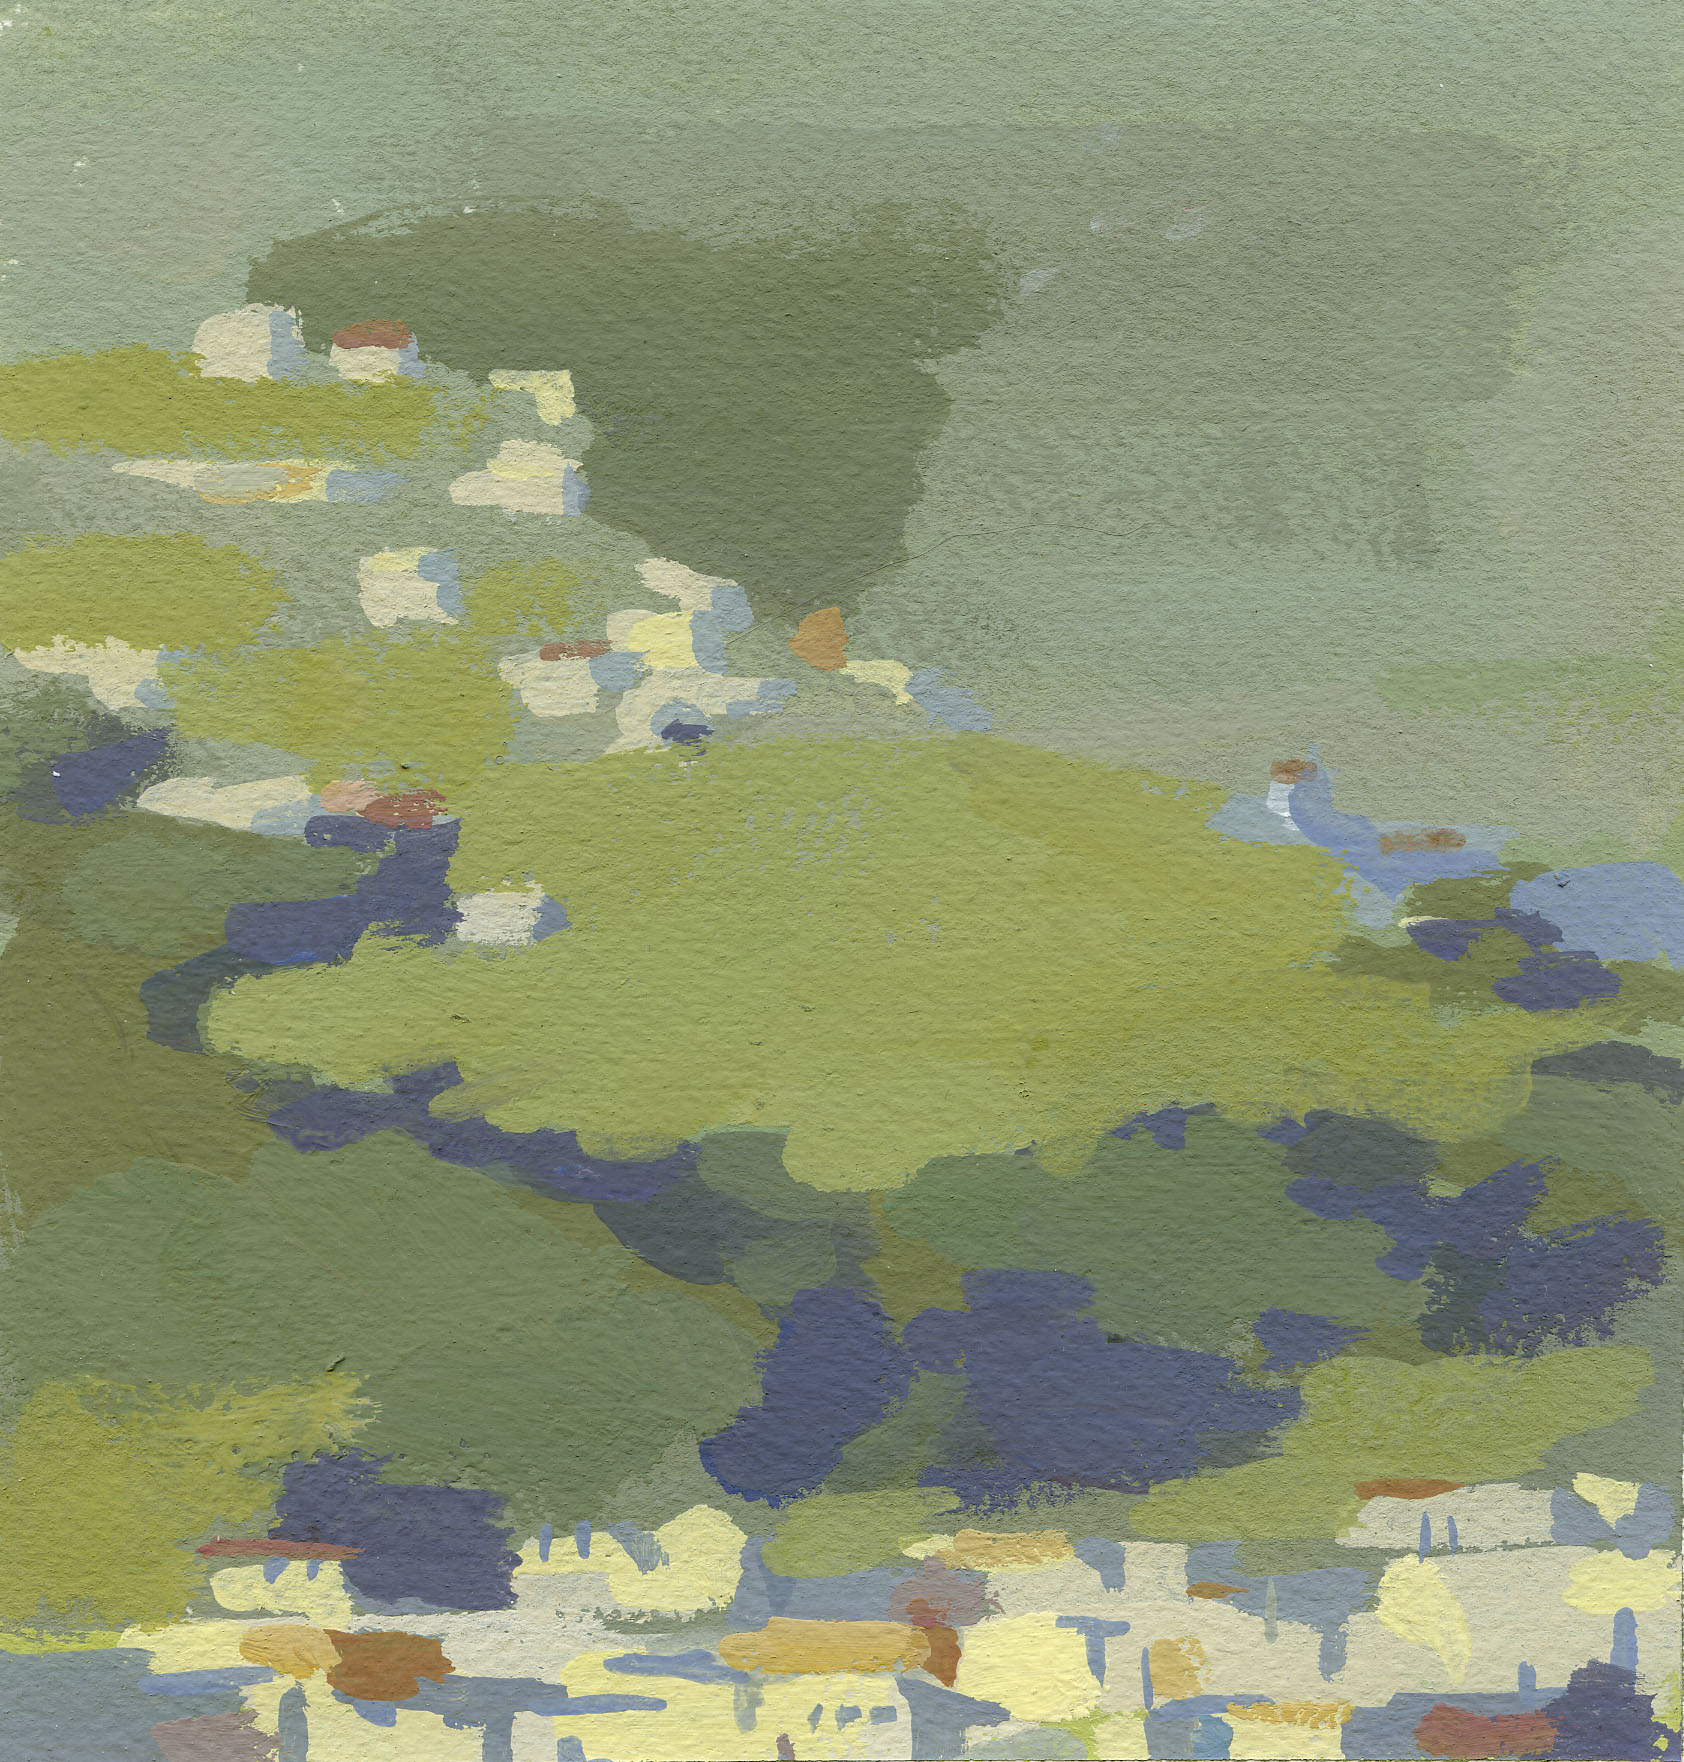 Home in the Rocks and Rills, Gouache on Paper, 6" x 6.5", 2014